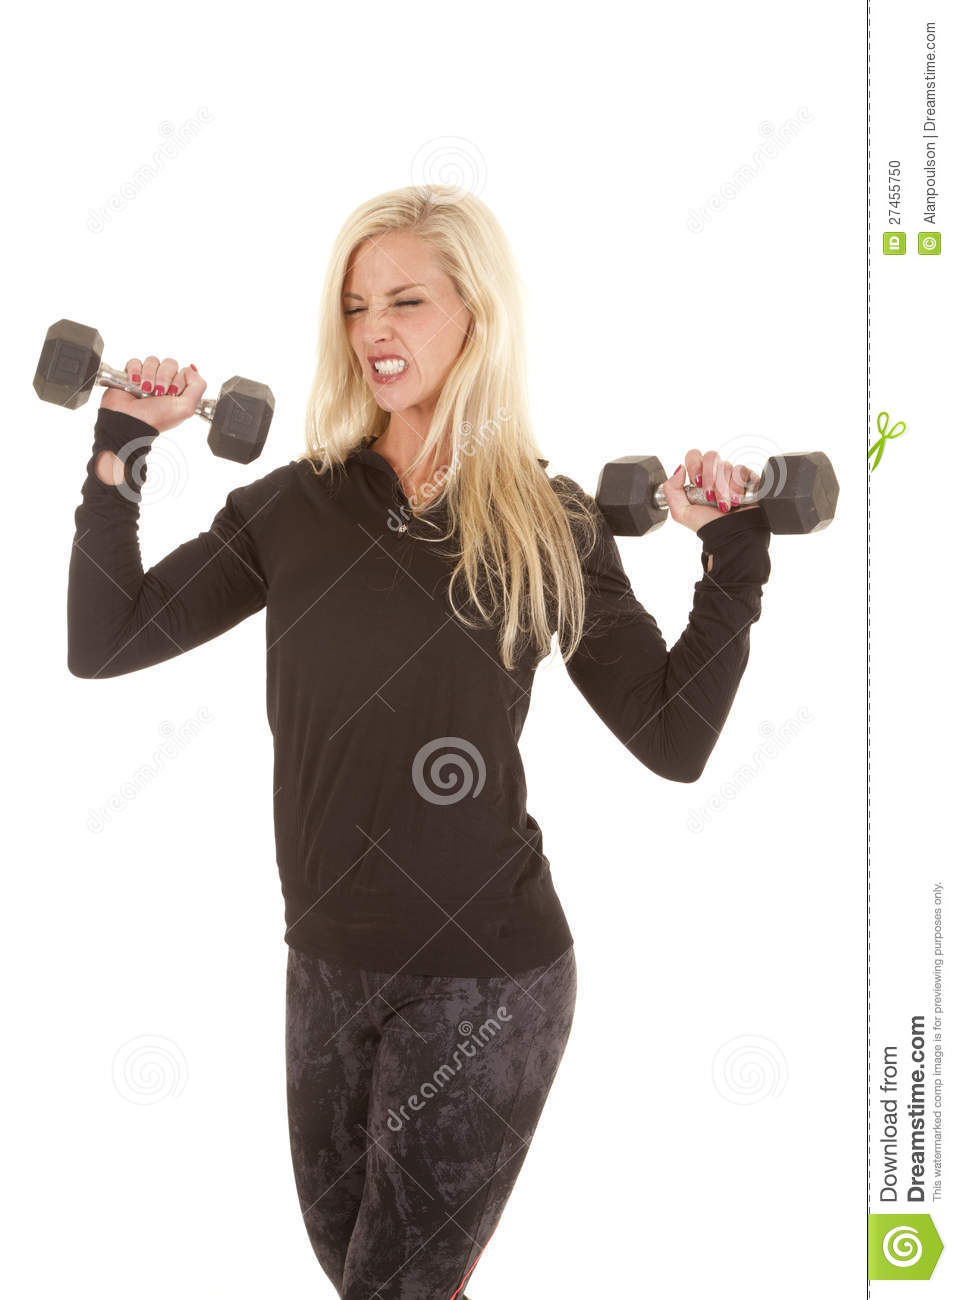 Woman In Black Lifting Two Weights Stock Photo   Image  27455750